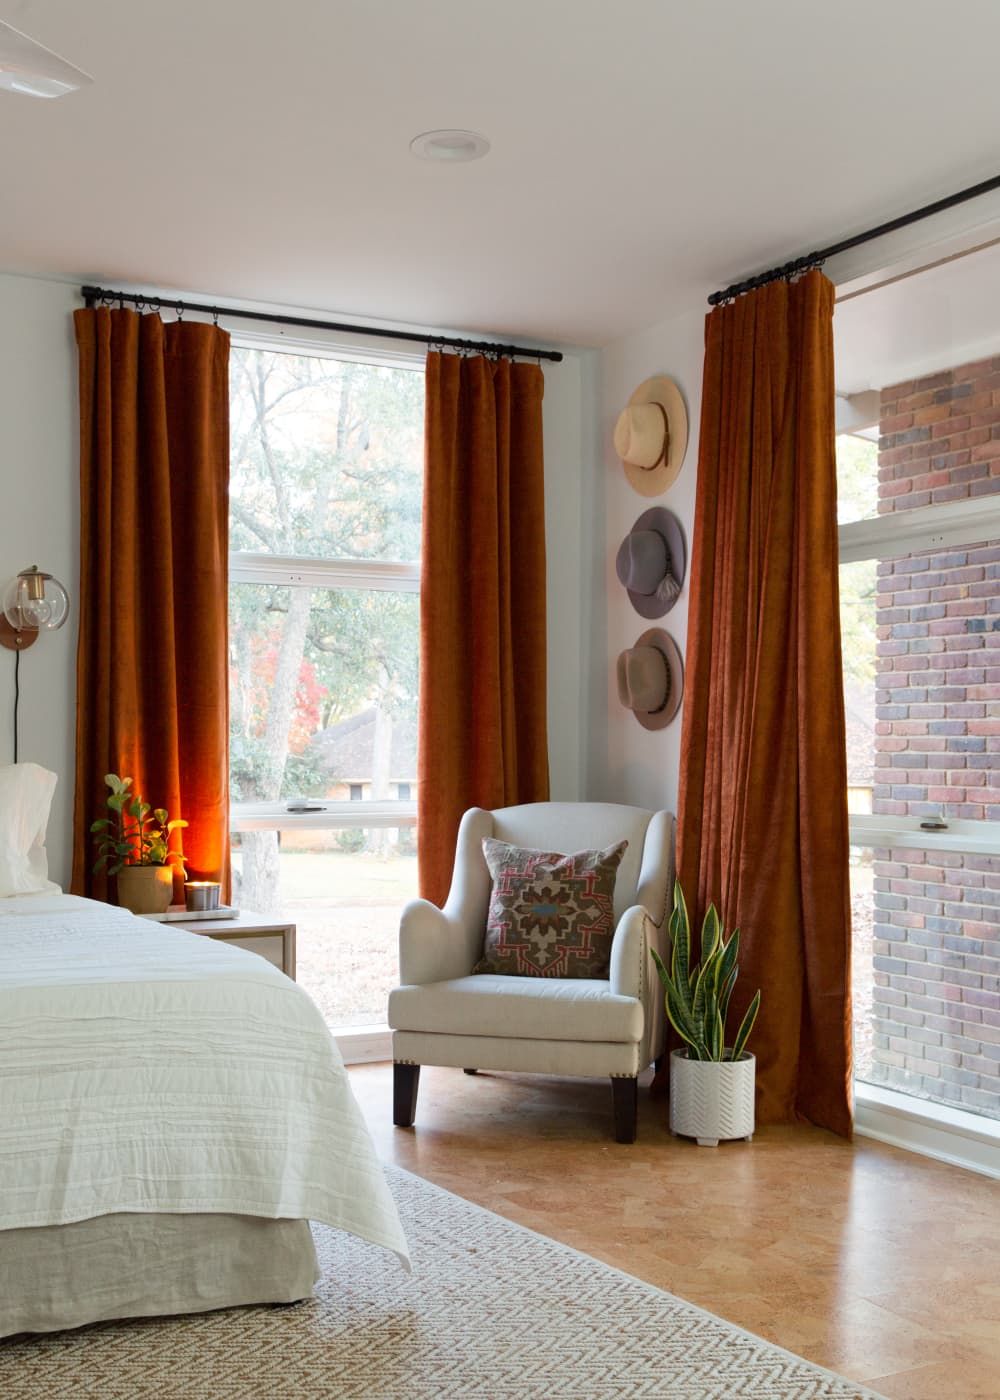 Orange Curtains: Add a Splash of Vibrant Color to Your Windows